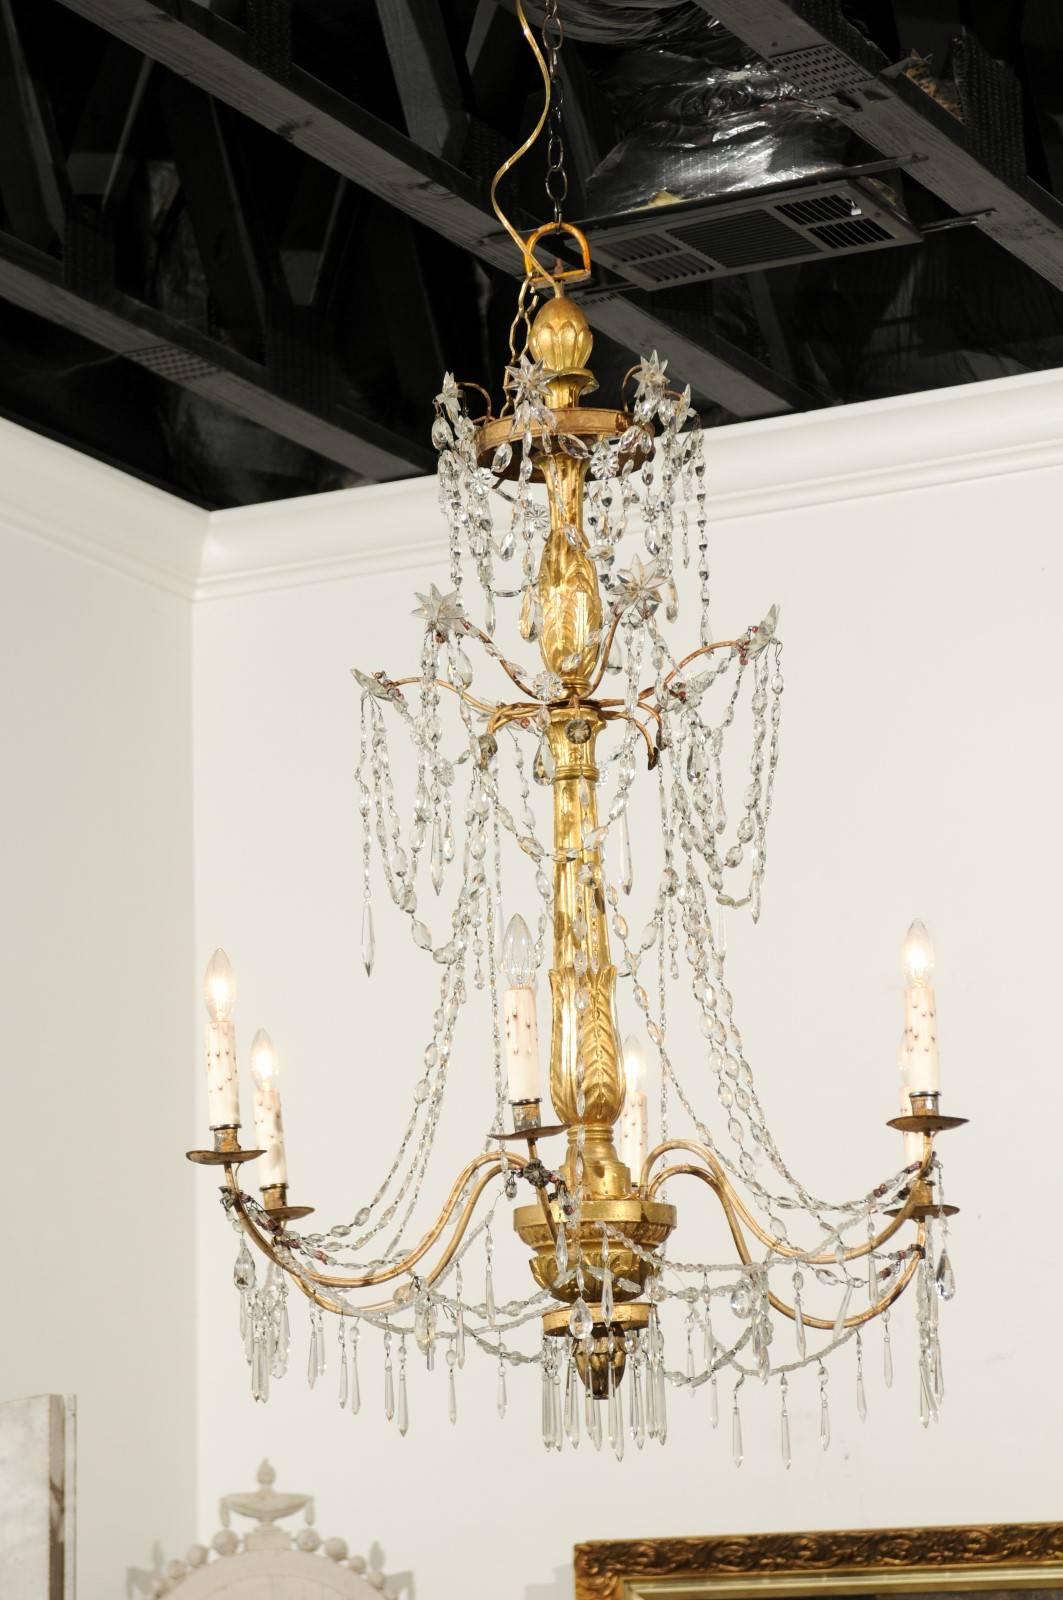 An Italian giltwood and crystal six-light chandelier from the mid-19th century. This Italian chandelier features a central giltwood staff, adorned on its surface with carved waterleaves and gadroons. Strands of faceted crystals accented with